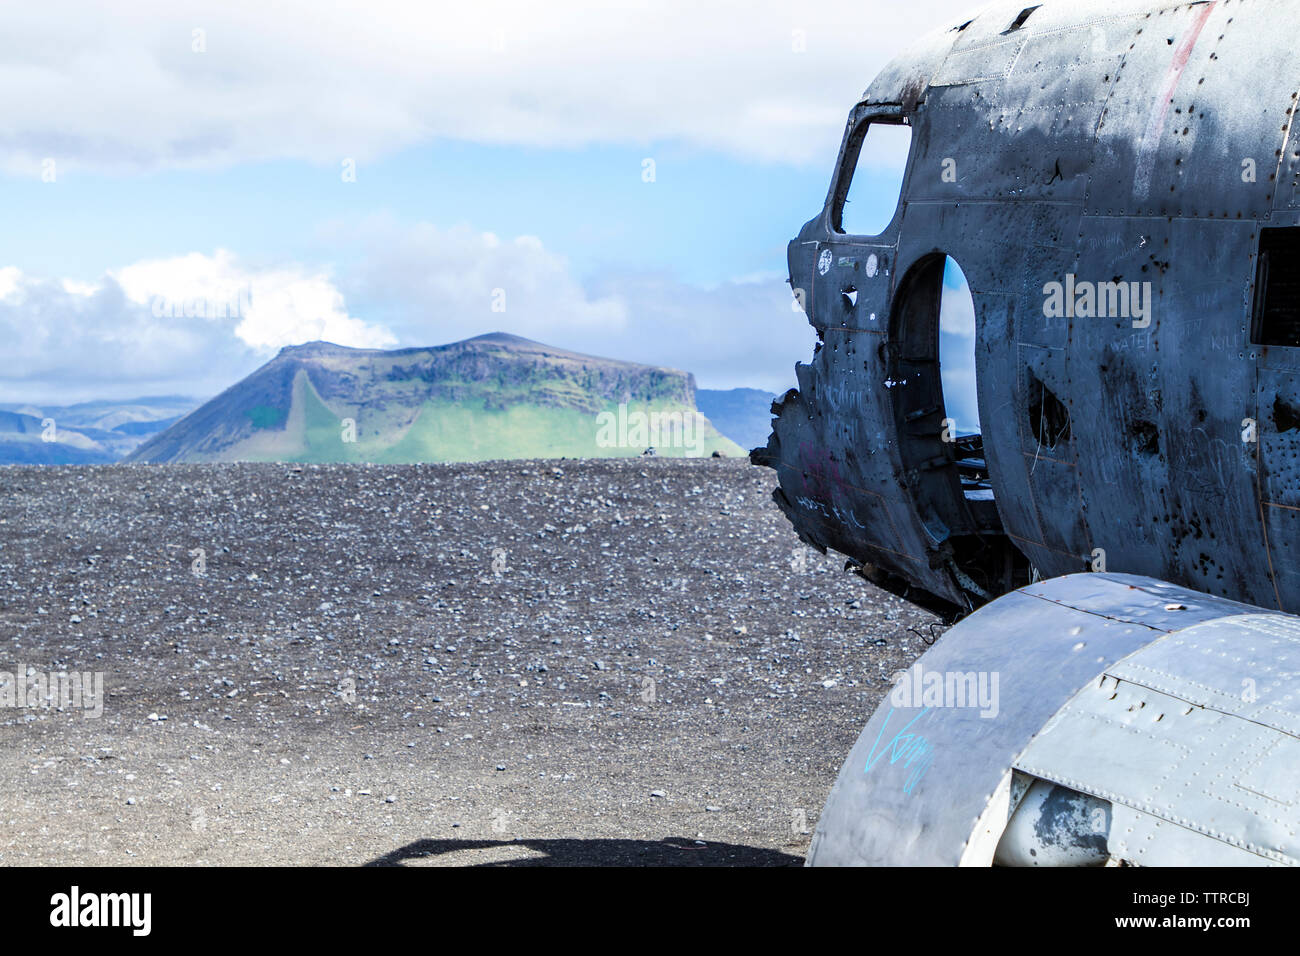 Close-up of airplane wreck against mountains Stock Photo